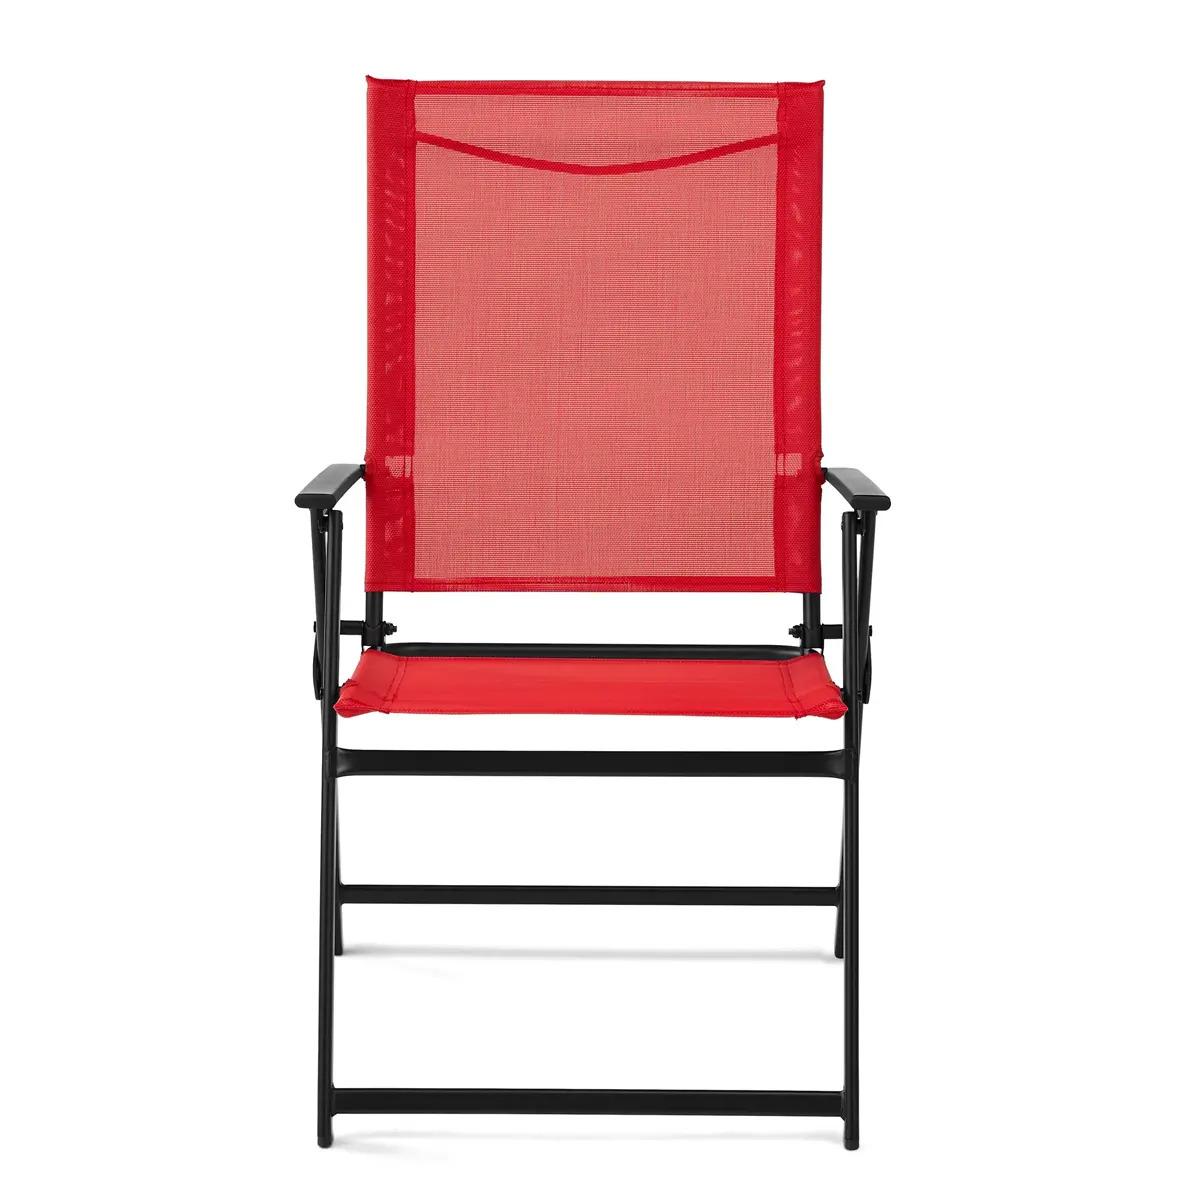 Mainstays Greyson Square Outdoor Patio Steel Sling Folding Chairs 2 Pack for $23